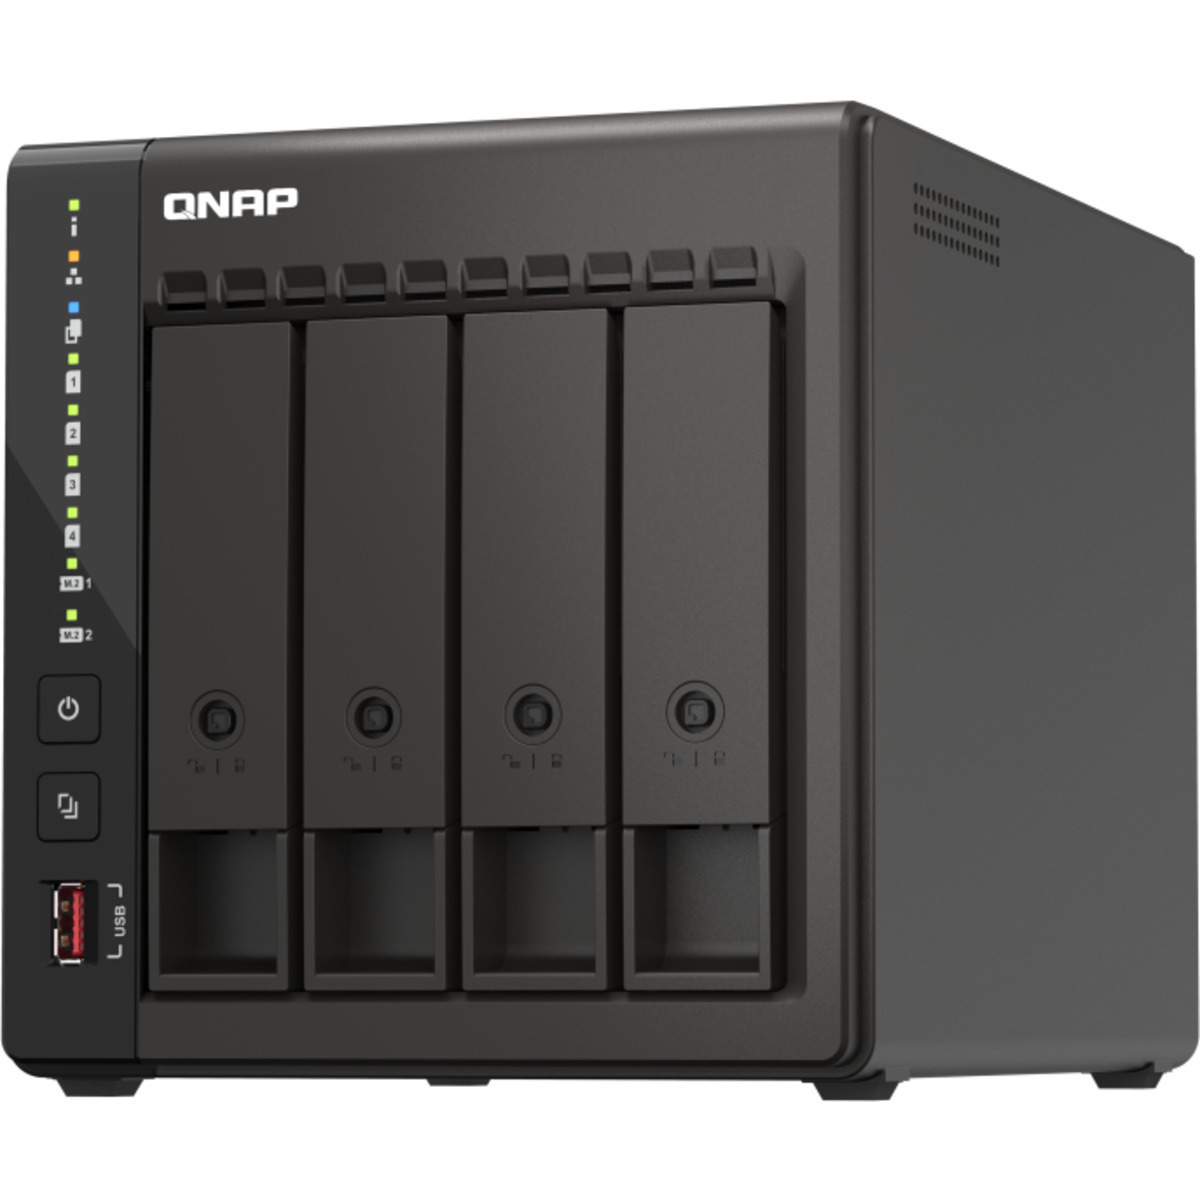 QNAP TS-453E 72tb 4-Bay Desktop Multimedia / Power User / Business NAS - Network Attached Storage Device 4x18tb Seagate IronWolf Pro ST18000NT001 3.5 7200rpm SATA 6Gb/s HDD NAS Class Drives Installed - Burn-In Tested TS-453E